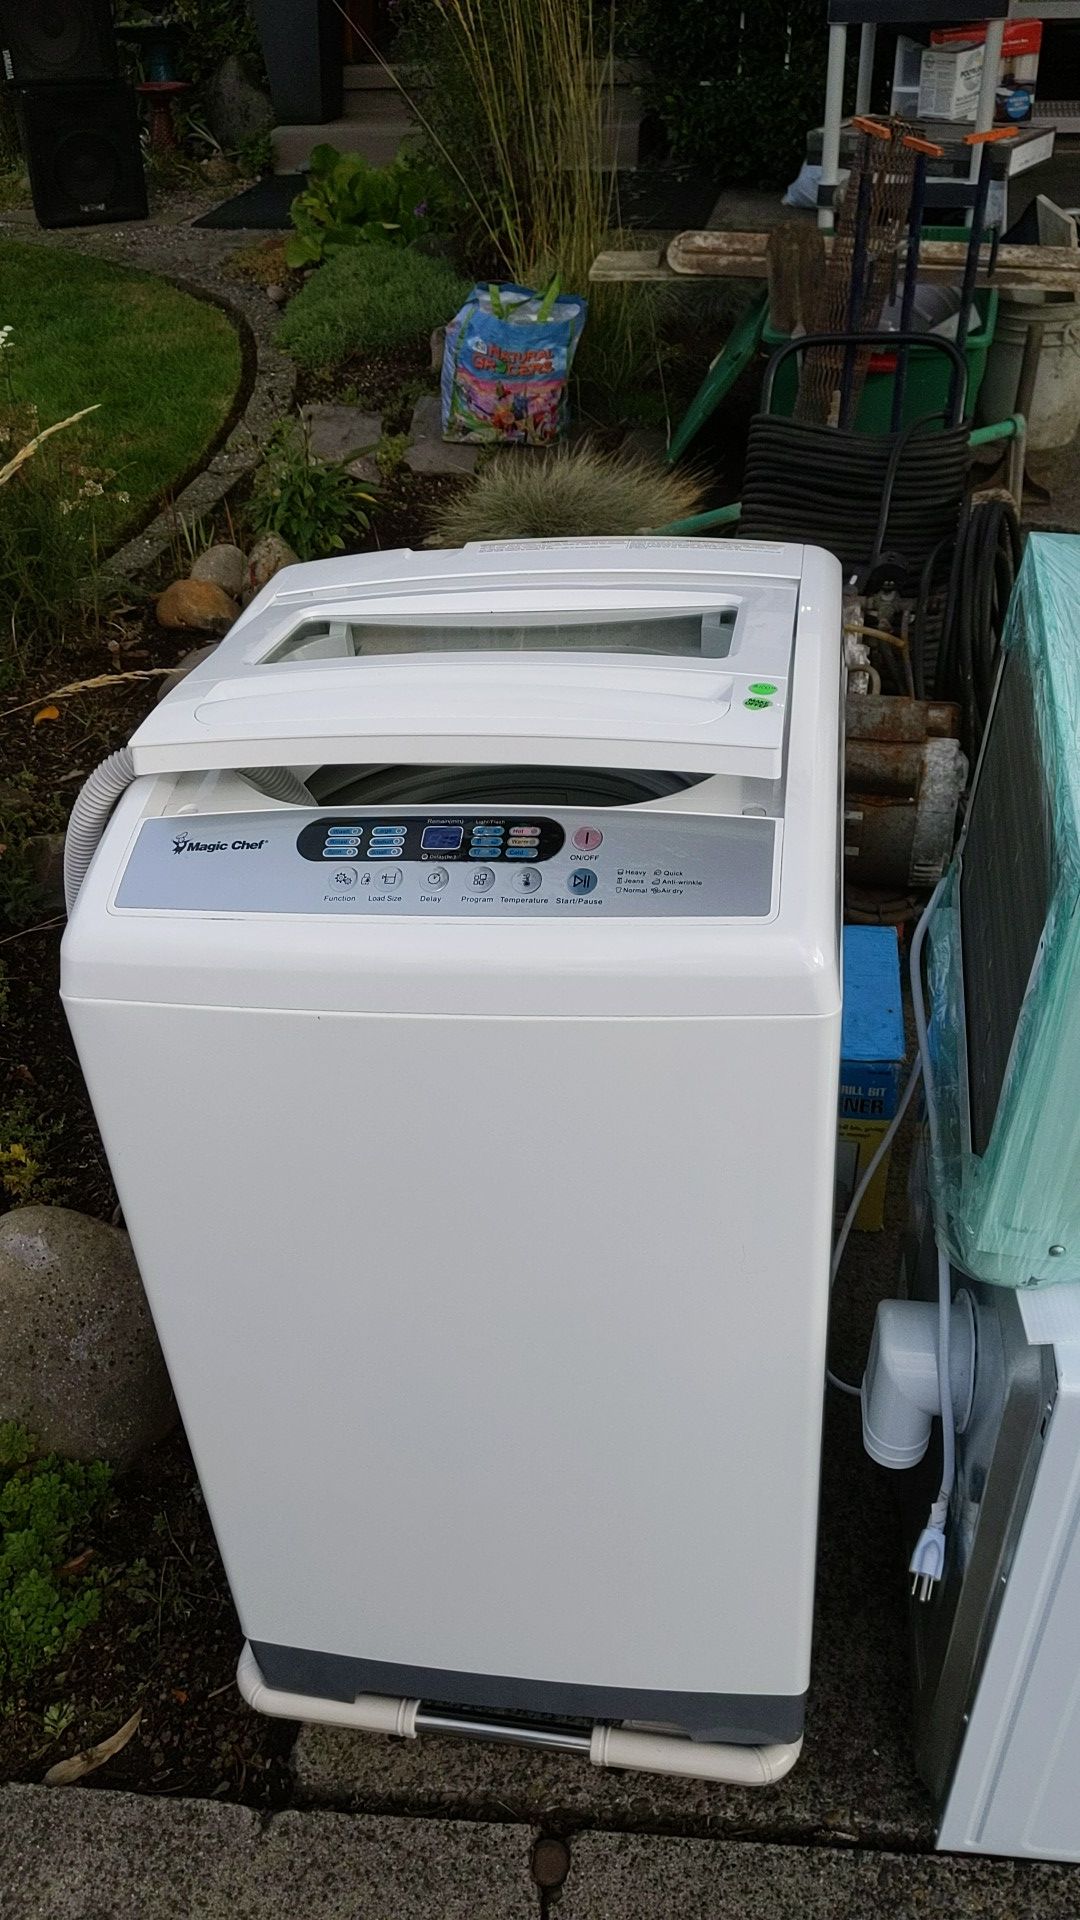 Portable a laundry washing machine great for apartments or motor homes or tiny homes